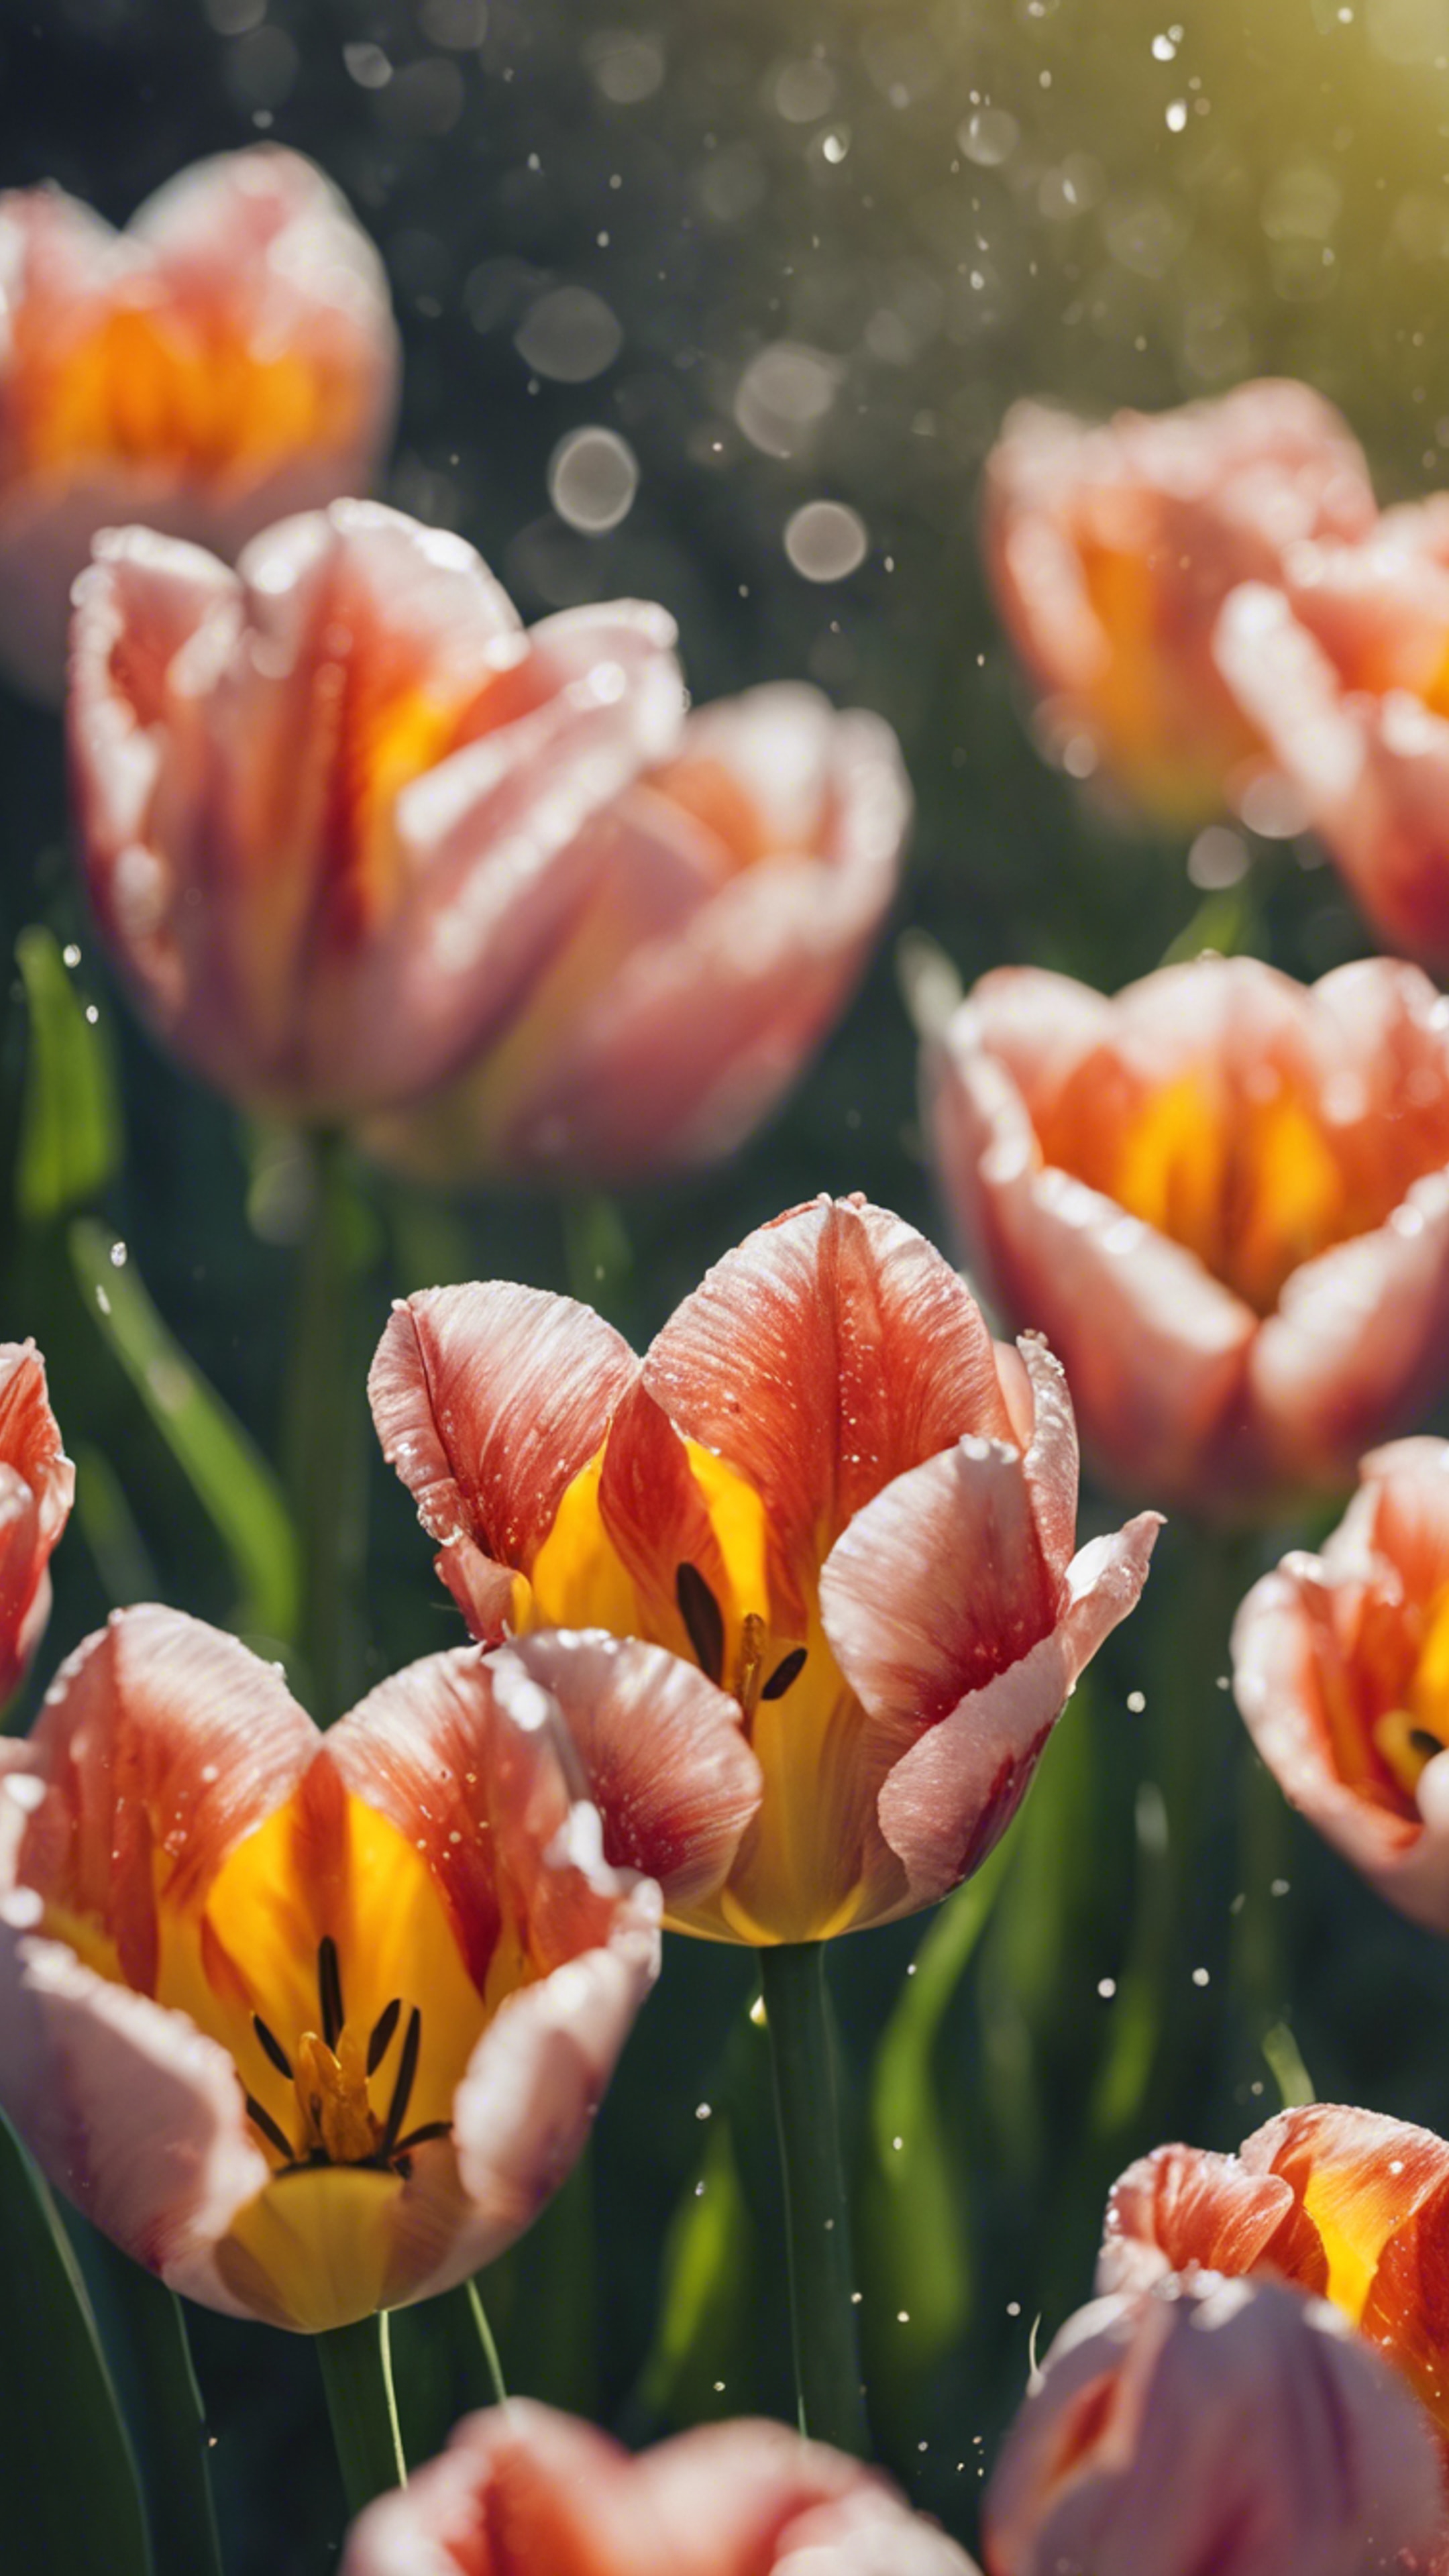 A close-up image of dew-speckled tulip petals opening to the warmth of a mild spring morning.壁紙[e13c163b065d4542a7e5]